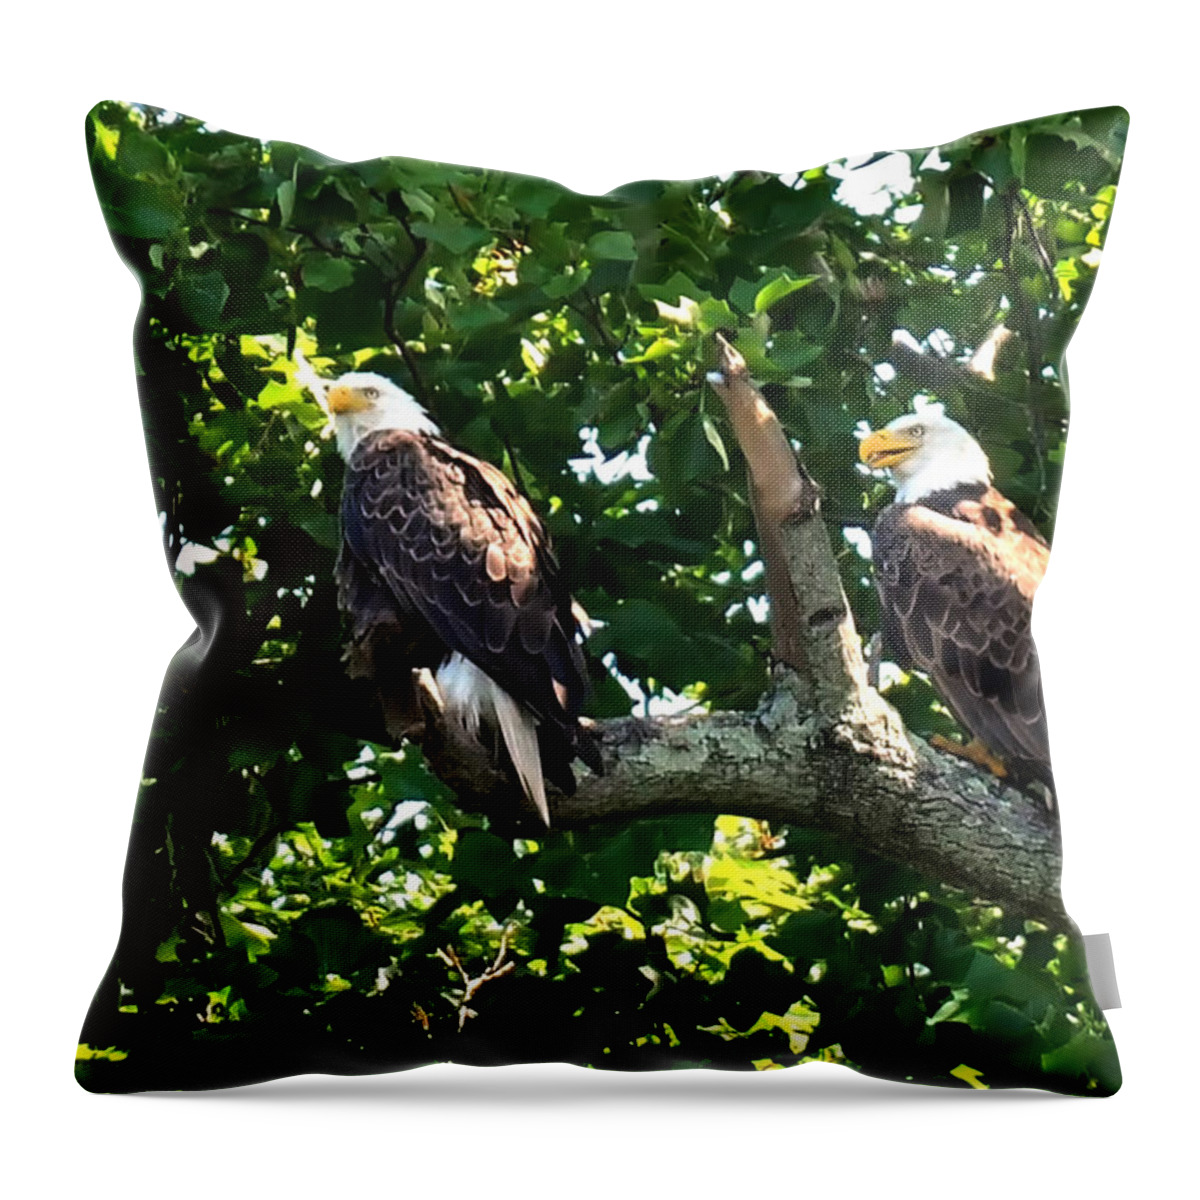 Eagles Mating Throw Pillow featuring the photograph Mating Pair by Randall Branham